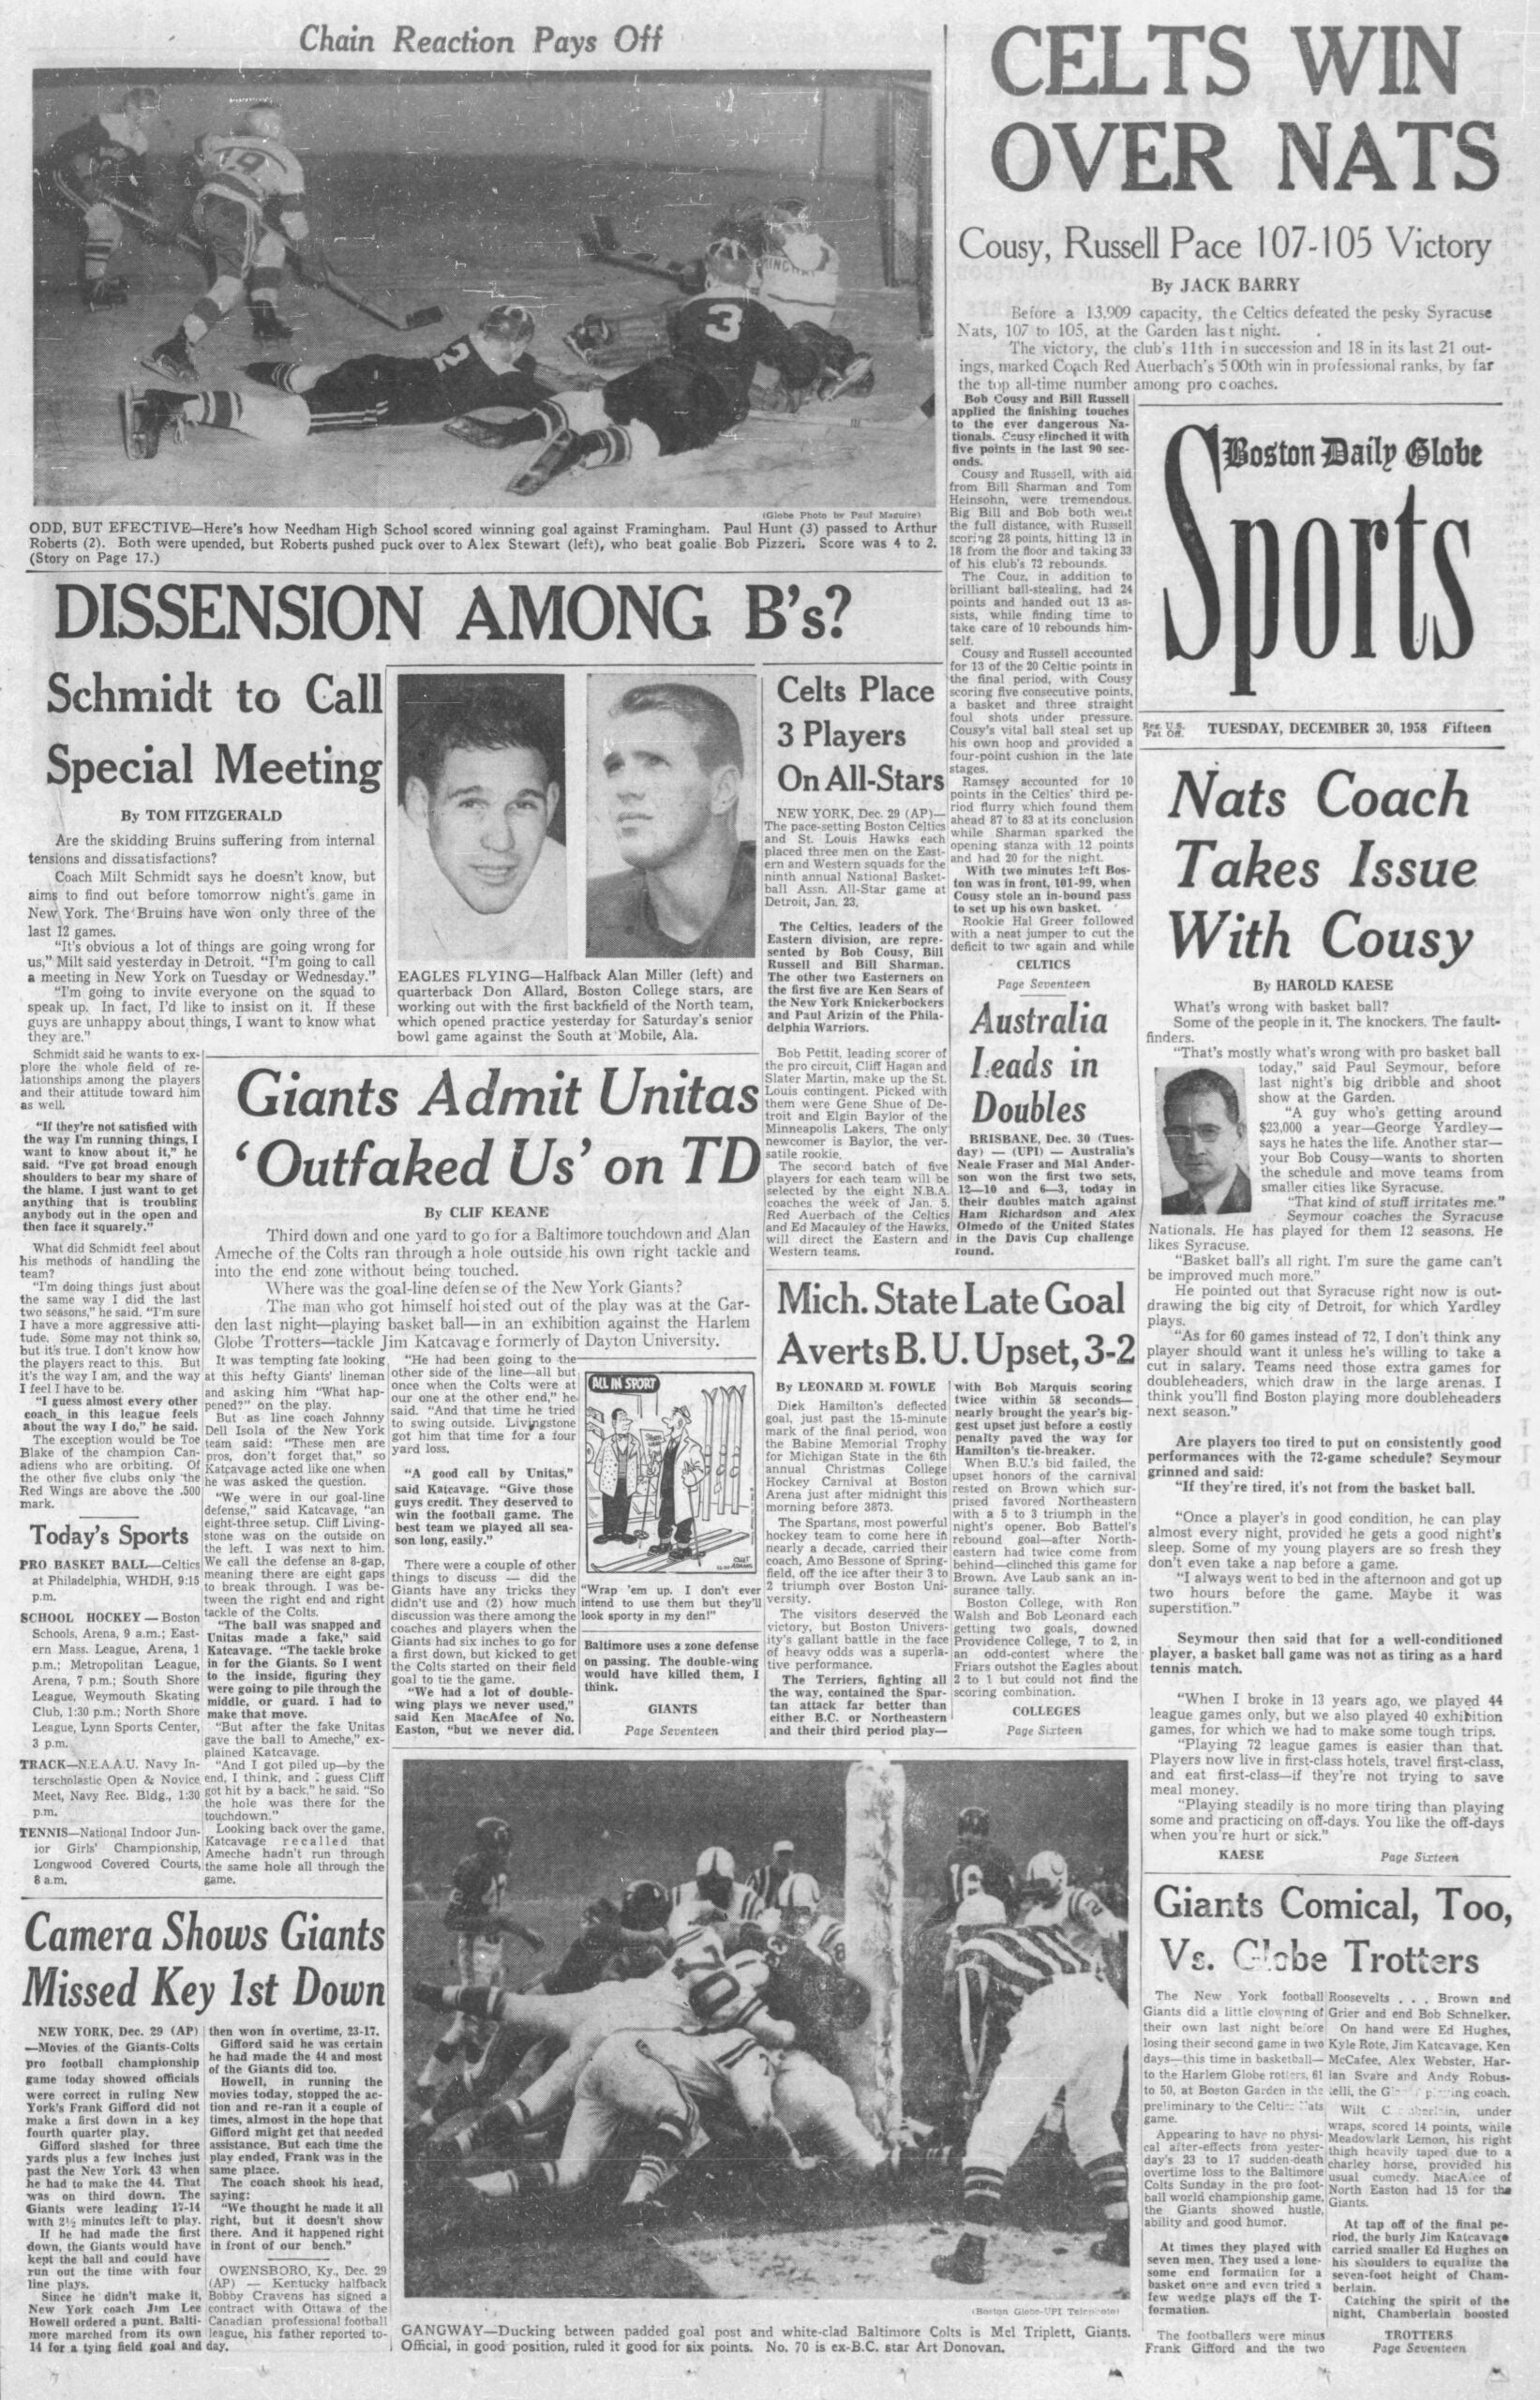 Boston Globe 1958: Bill Russell and Bob Cousy lead Celtics past Nationals.